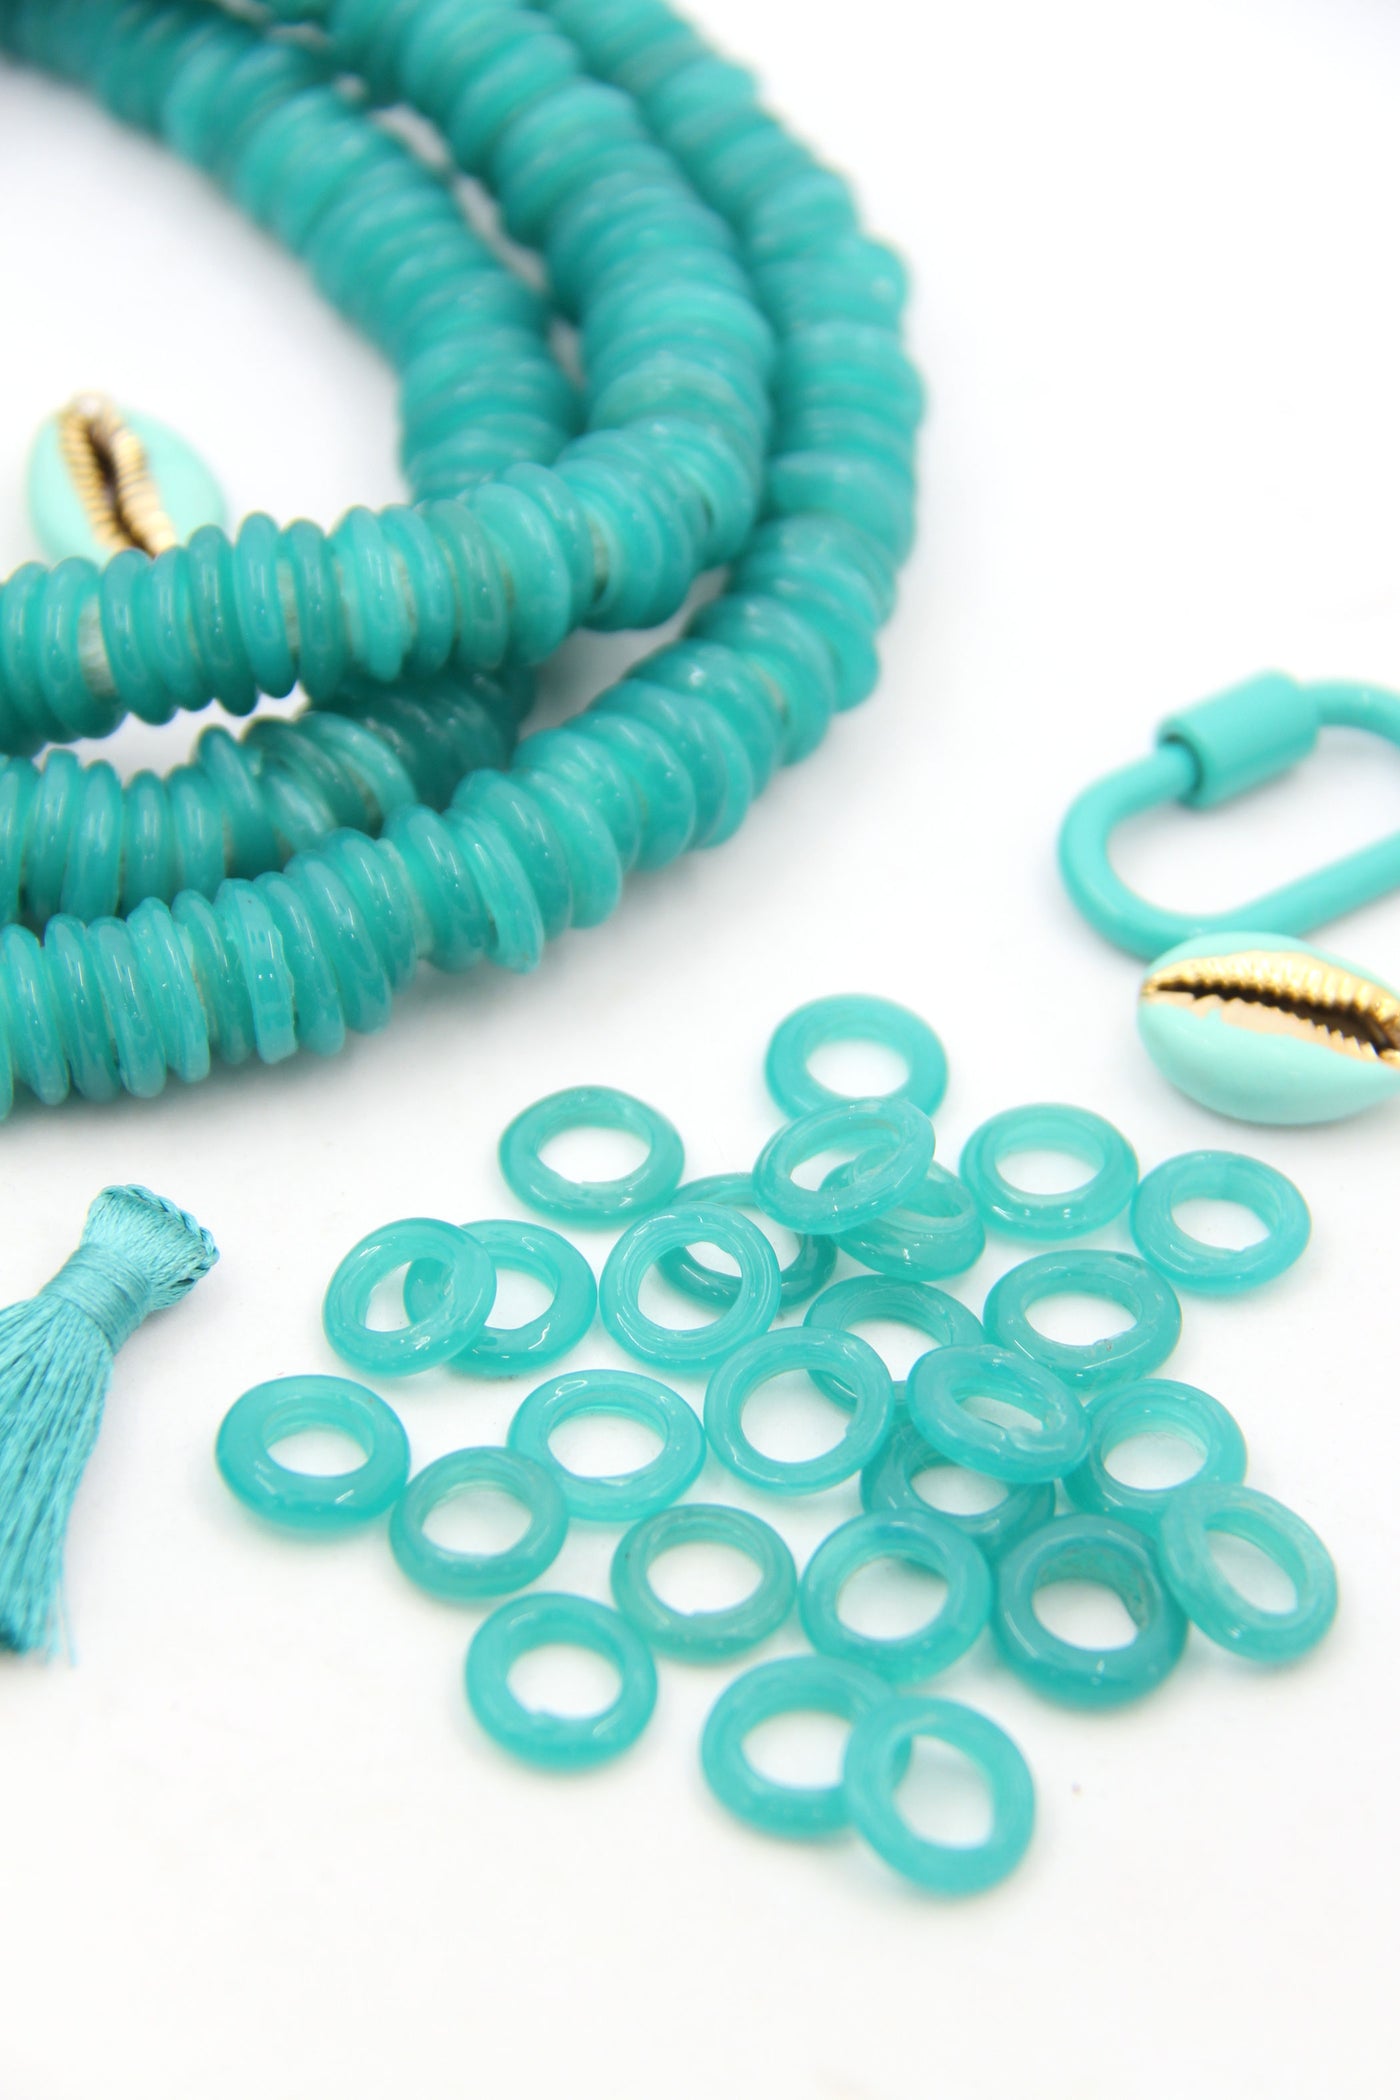 Turquoise Opal Dutch Donut Dogon Beads: 11-12mm, 10 Pieces